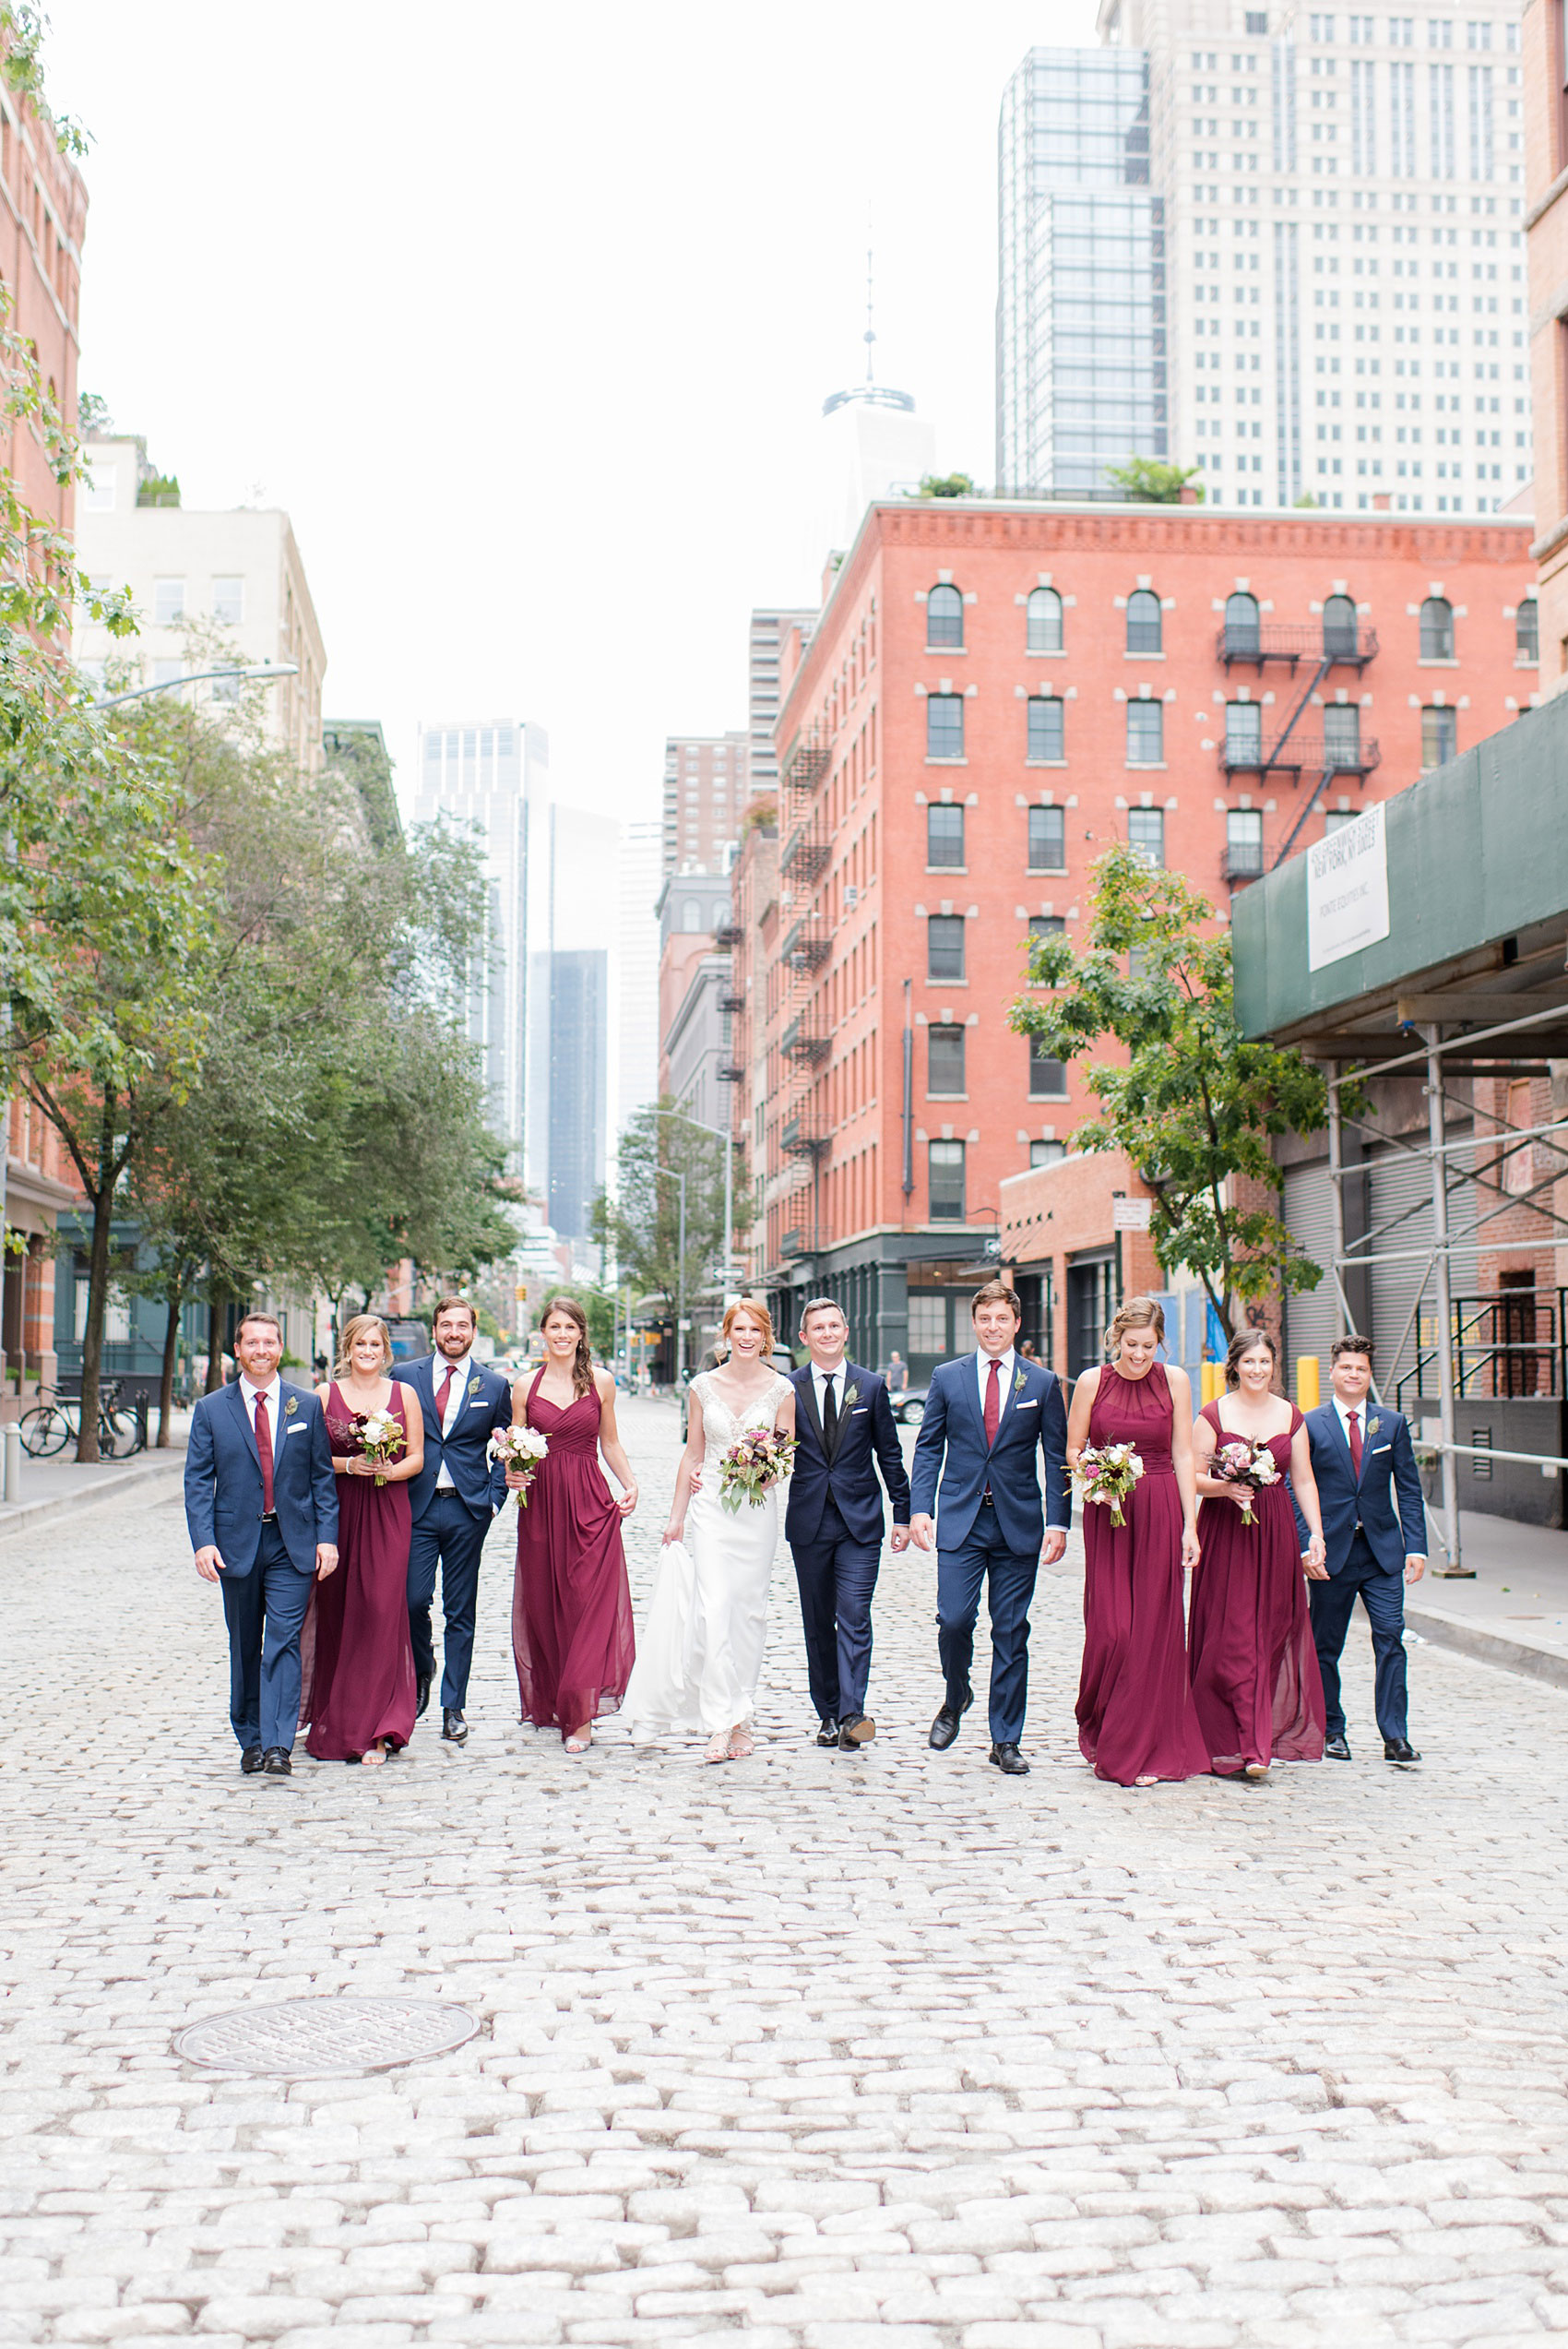 Photos of a NYC wedding venue, Tribeca Rooftop, by Mikkel Paige Photography. This ceremony and reception location has an outdoor space overlooking the Manhattan skyline. These pictures will provide inspiration in New York! The bride and groom were surrounded by bridesmaids in cranberry gowns and groomsmen in navy blue suits, holding fall flowers. Click through for more details from this celebration! #TribecaRooftop #MikkelPaige #NYCwedding #NYCWeddingVenues #NYCWeddingPhotography #FallFlowers